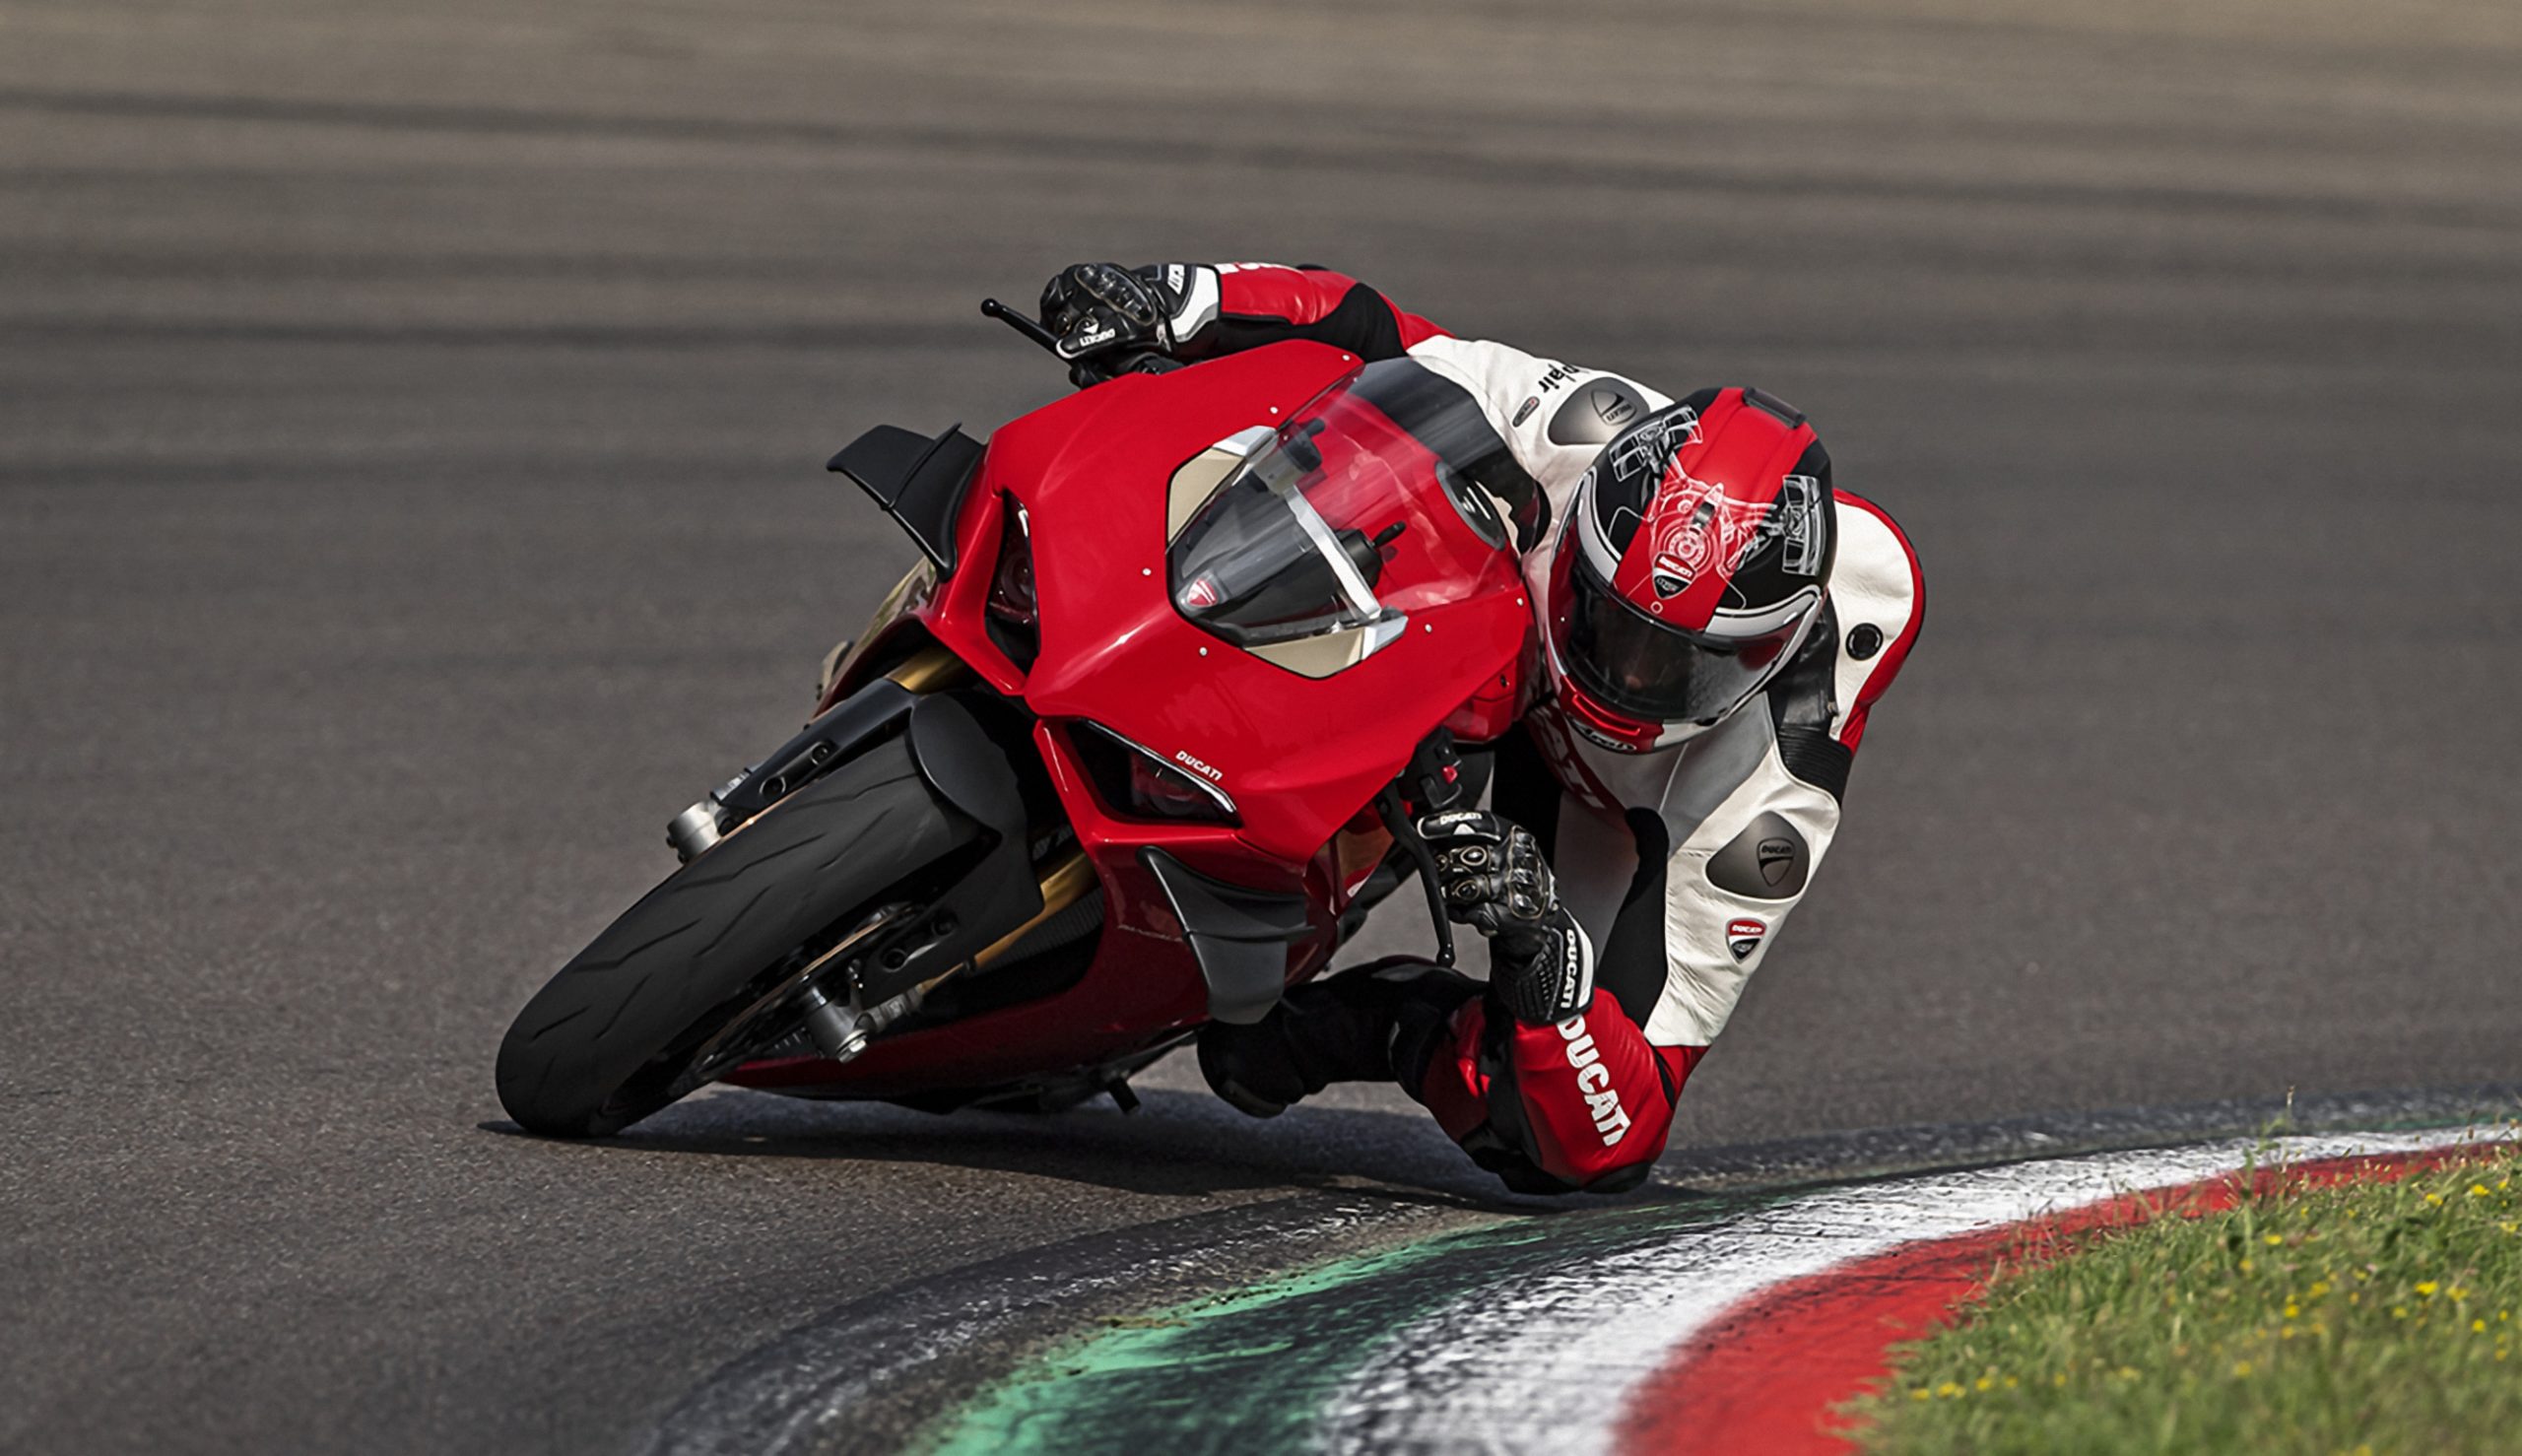 A view of a rider from Team Ducati leaning into the twisties